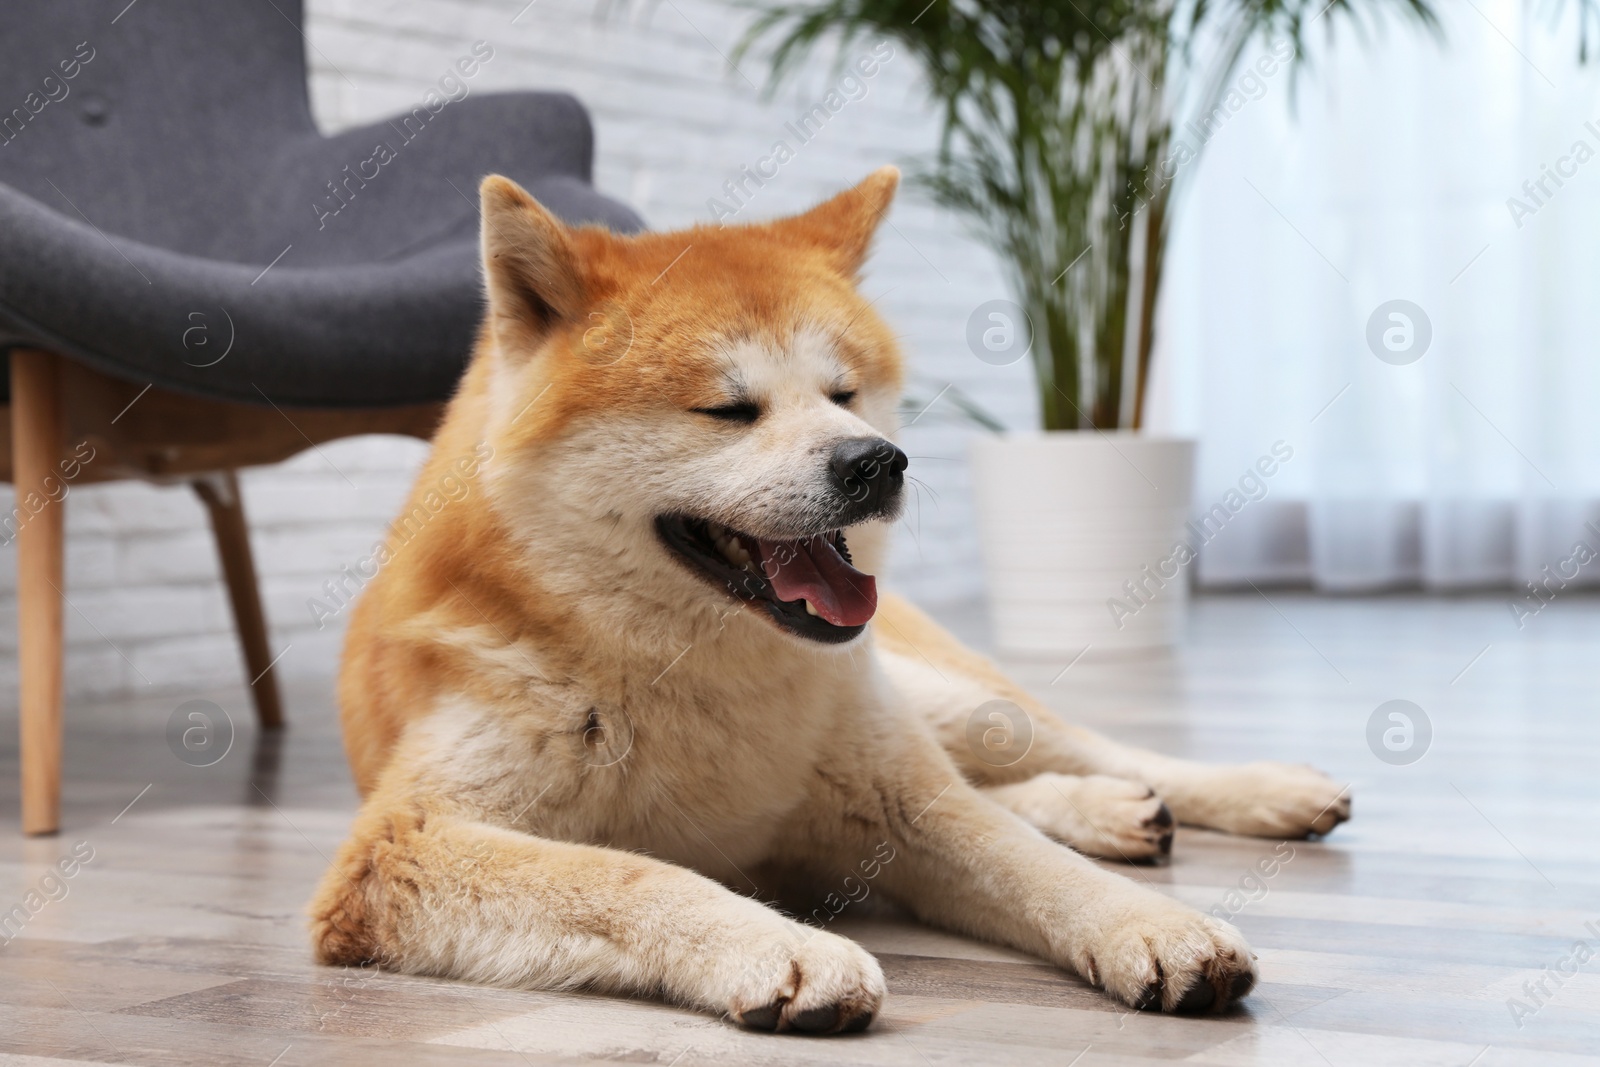 Photo of Adorable Akita Inu dog on floor in living room